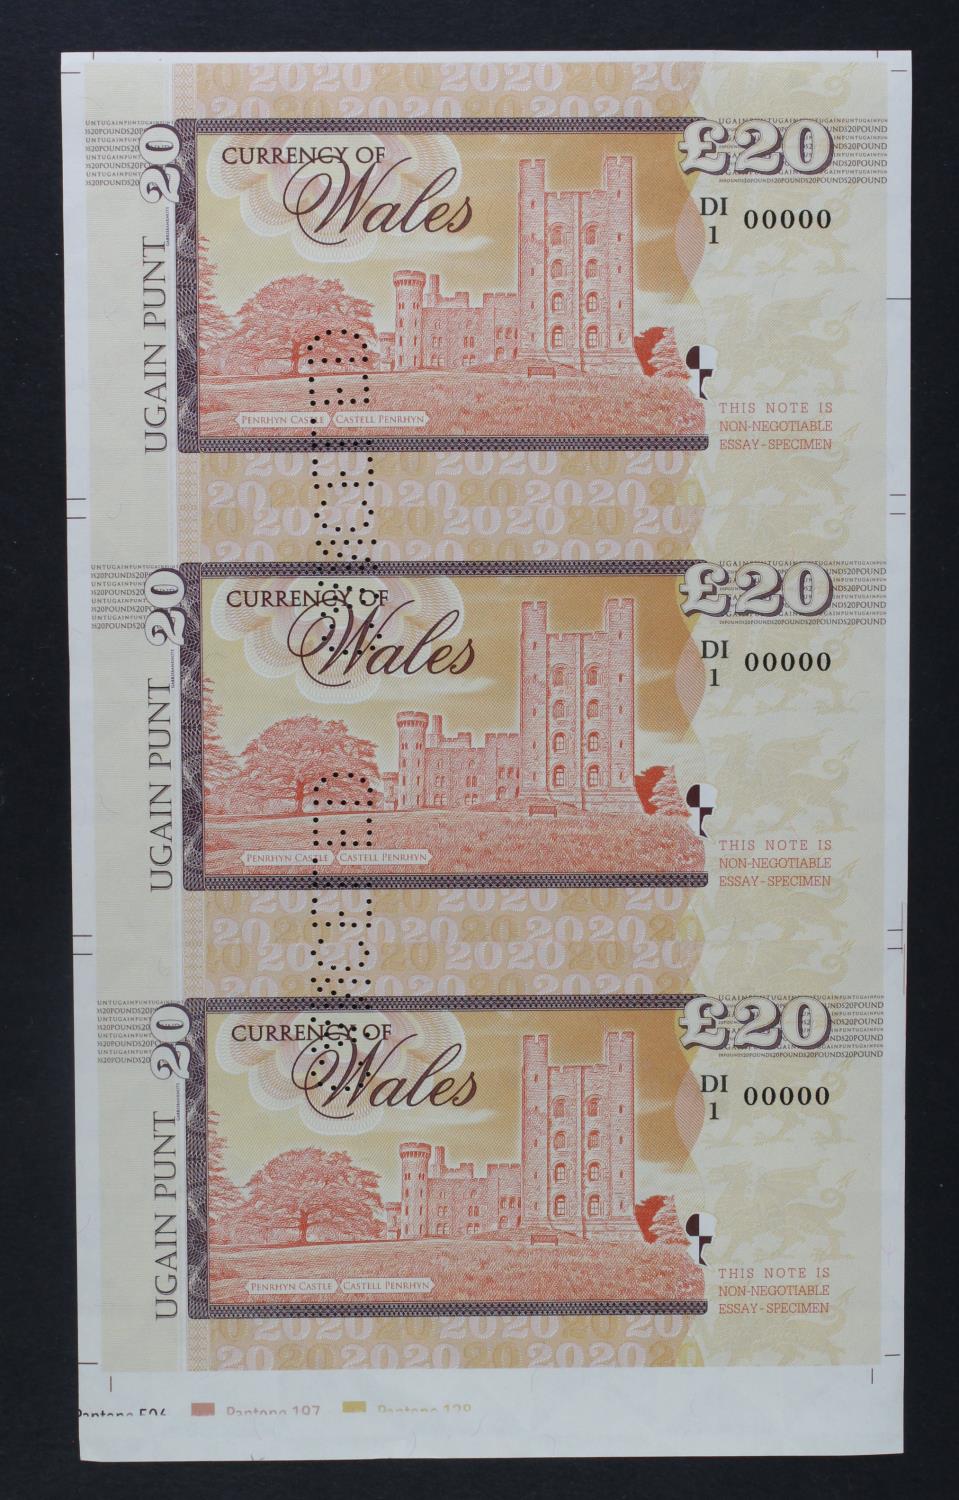 Test Note, 20 Pounds Banknote of Wales (not legal tender), private essay security printing - Image 2 of 2